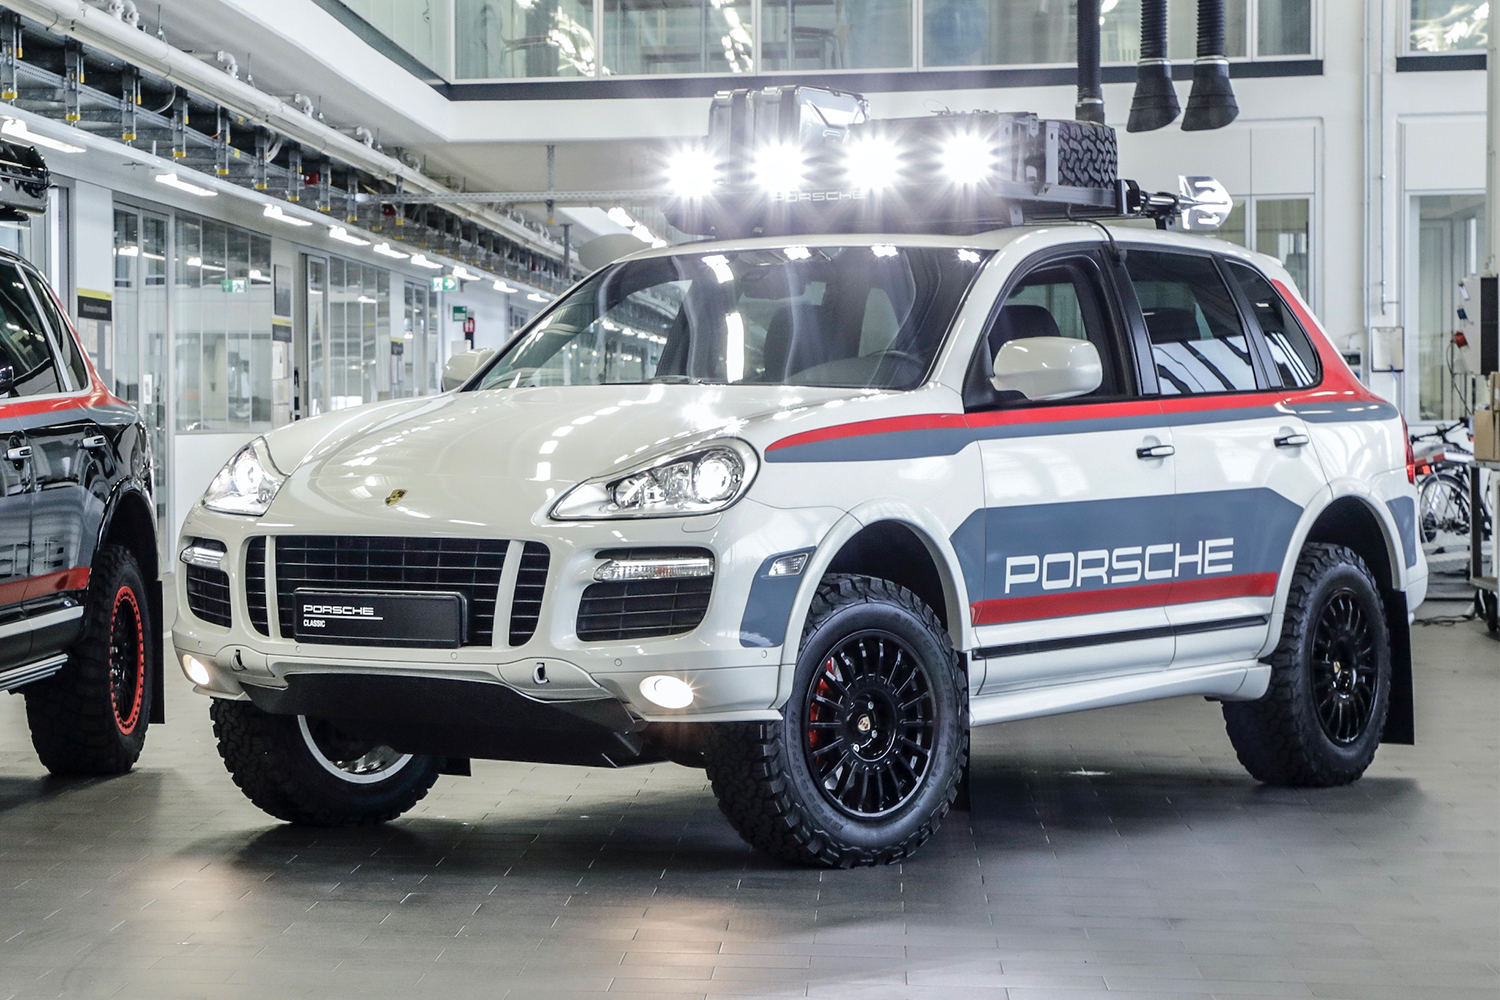 A first-generation Porsche Cayenne SUV that was customized for outdoors and off-road performance. The show car demonstrates the automaker's commitment to customization.